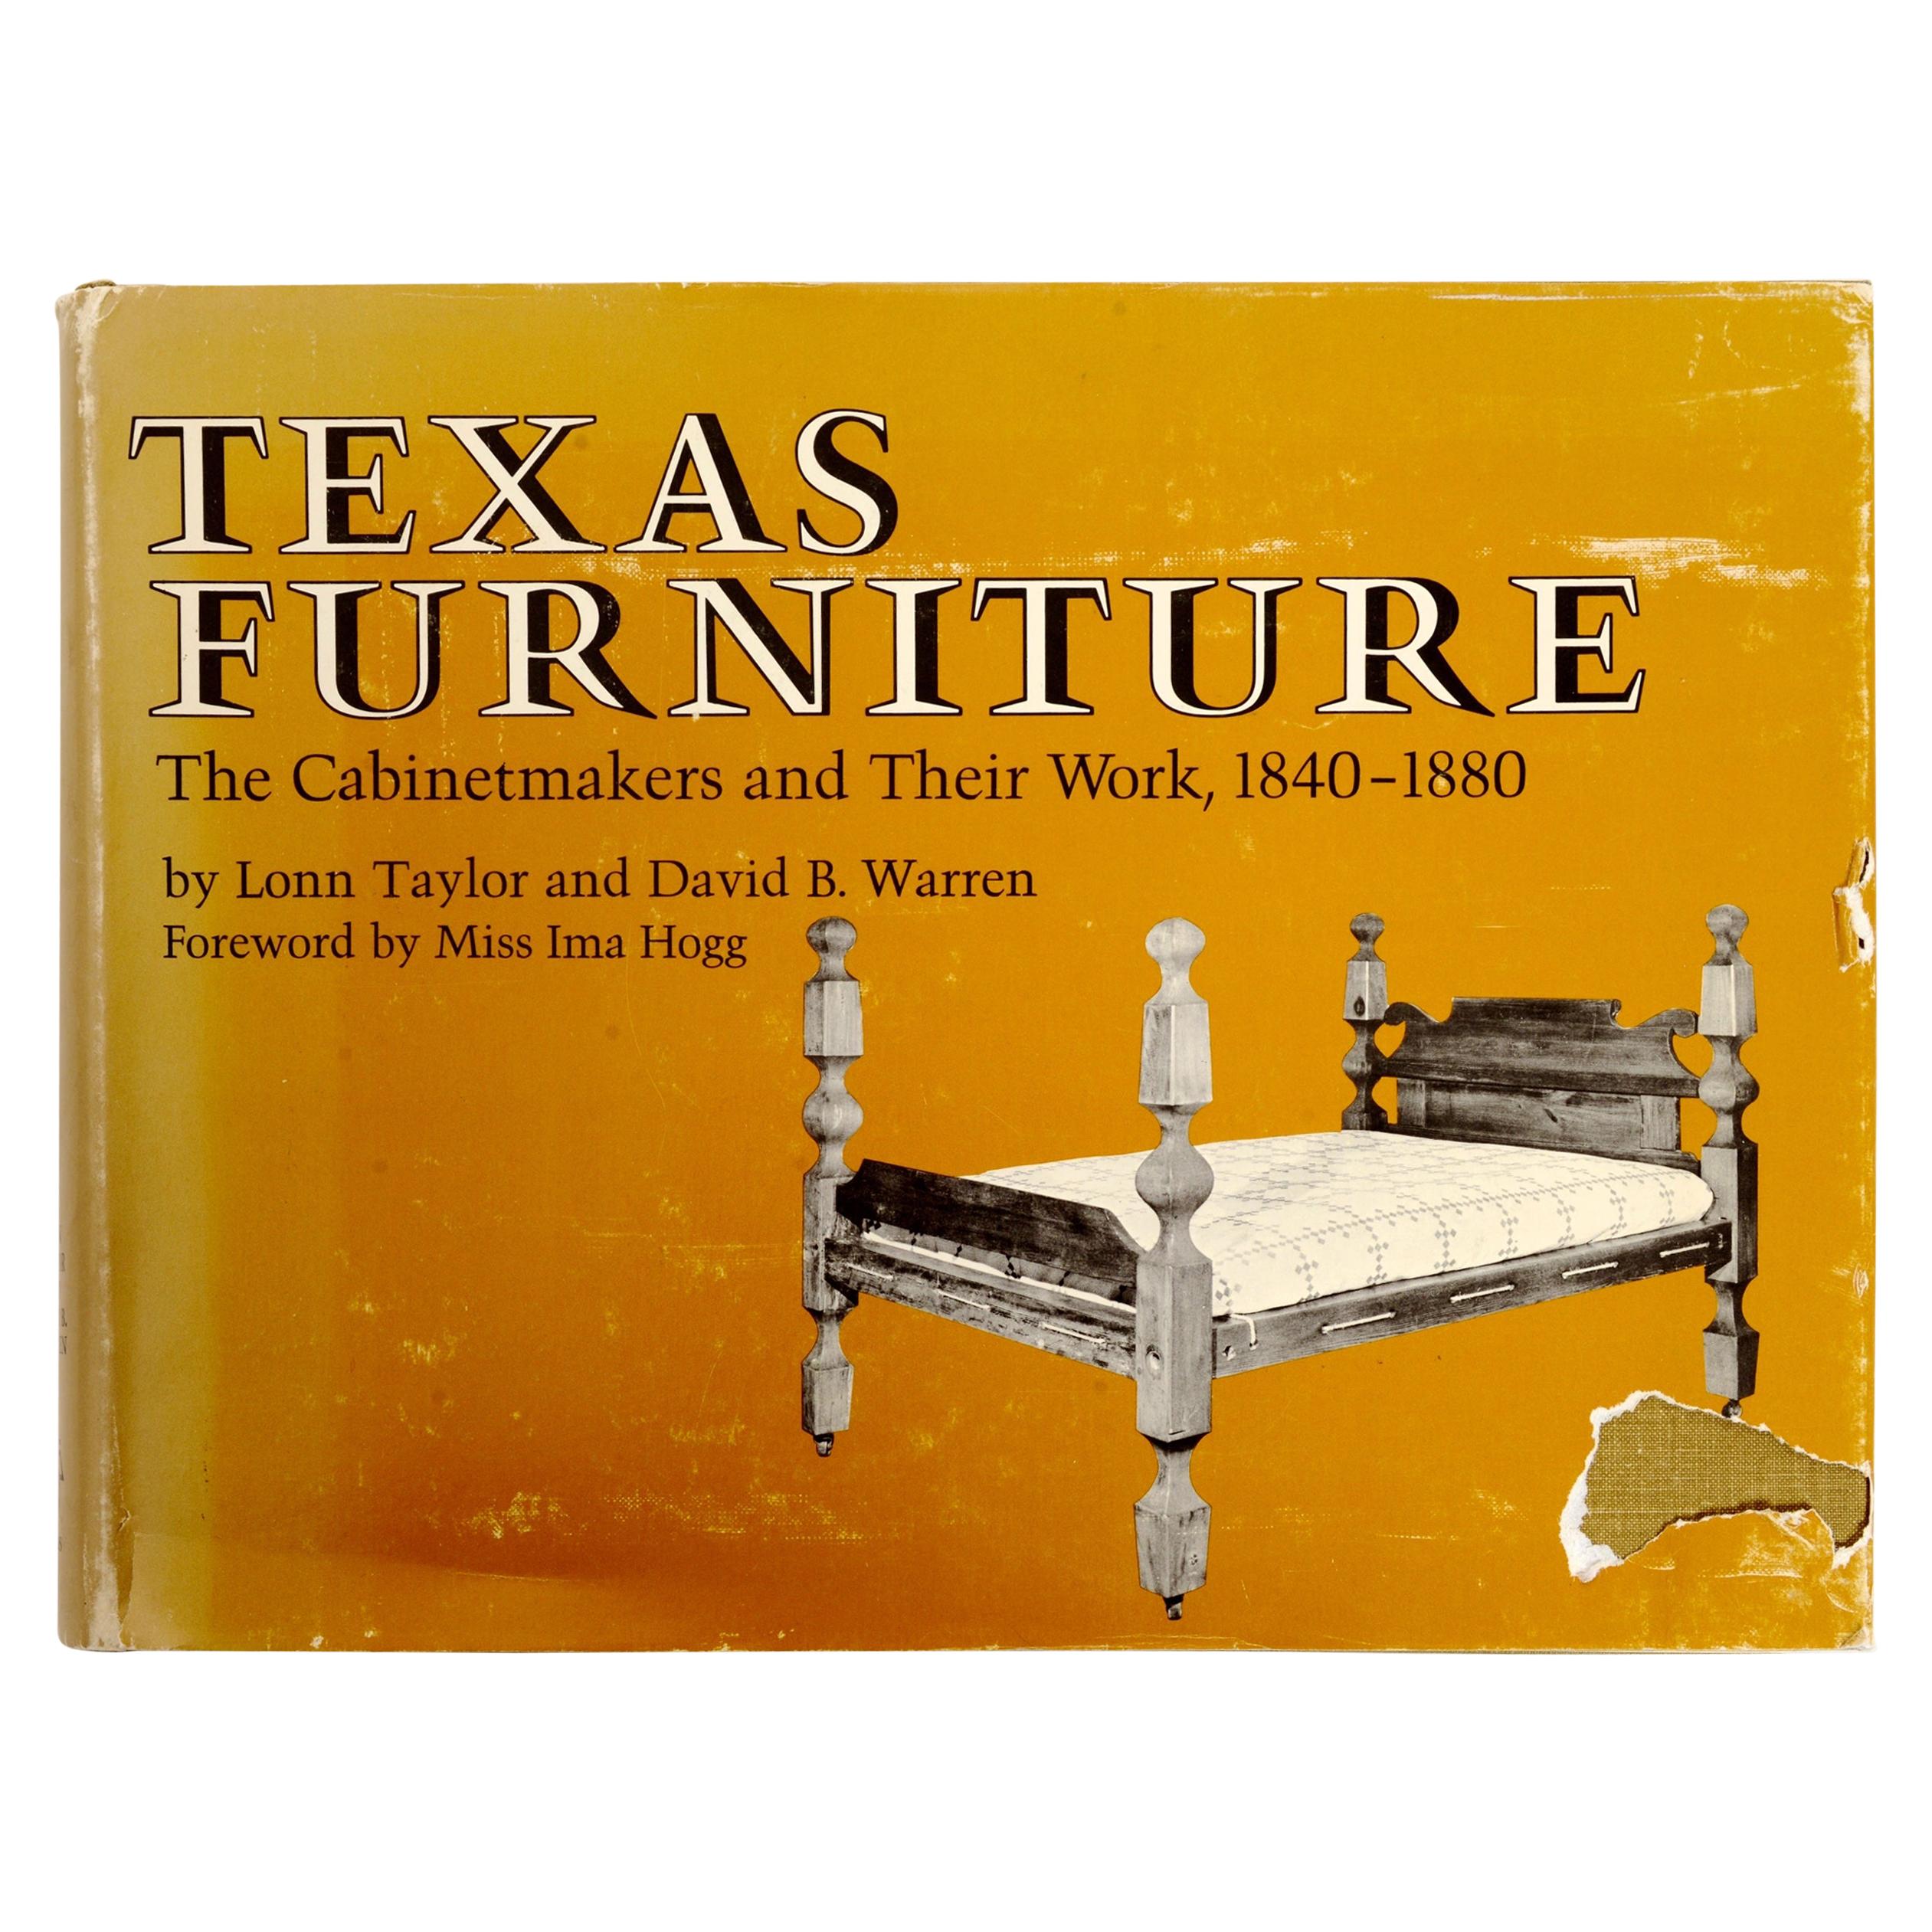 Texas Furniture: The Cabinetmakers & Their Work, 1840-1880, First Edition